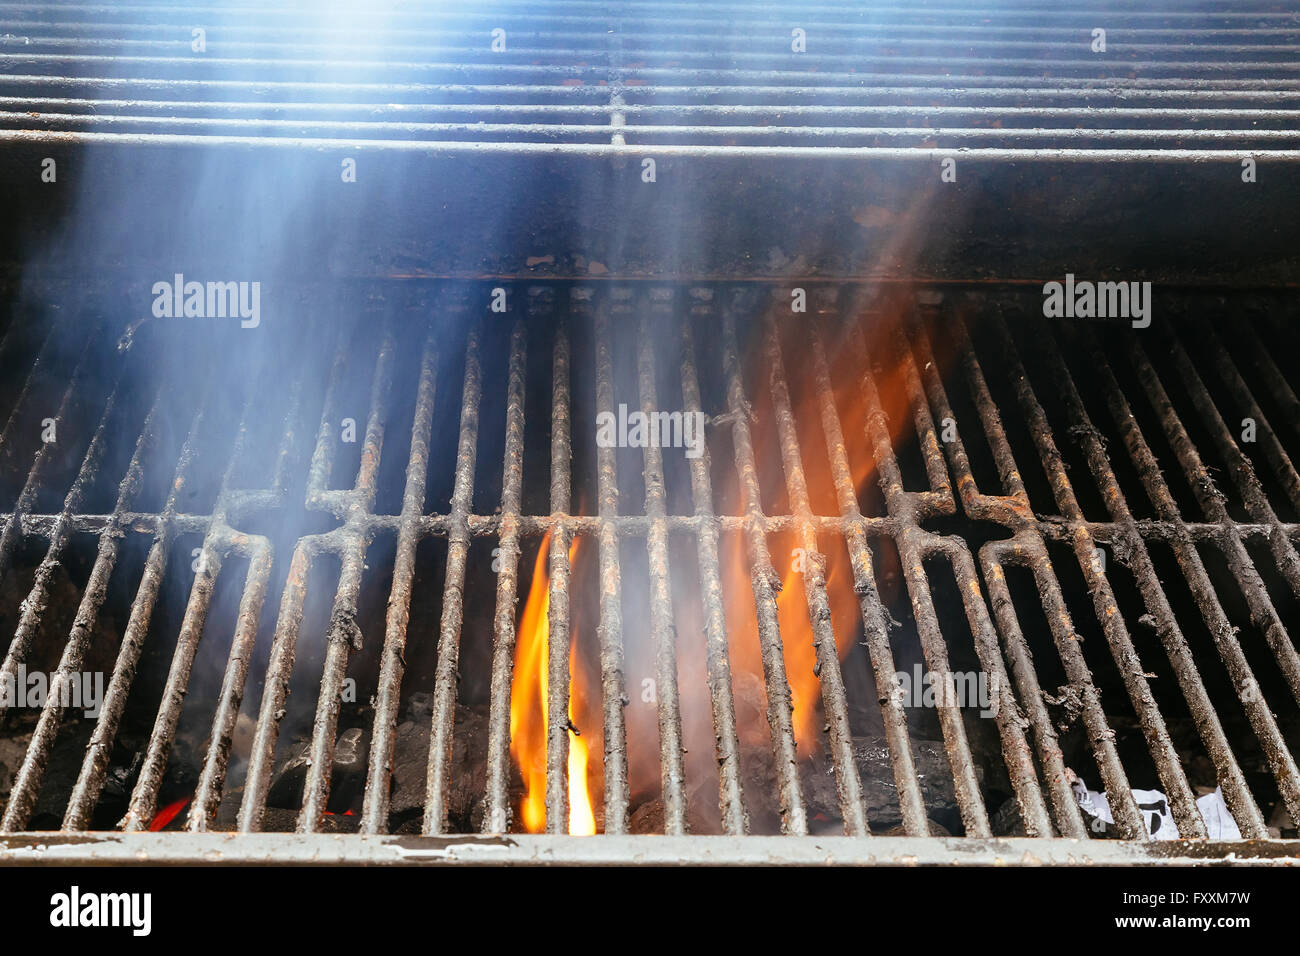 BBQ Grill and glowing coals. You can see more BBQ, grilled food, fire Stock Photo